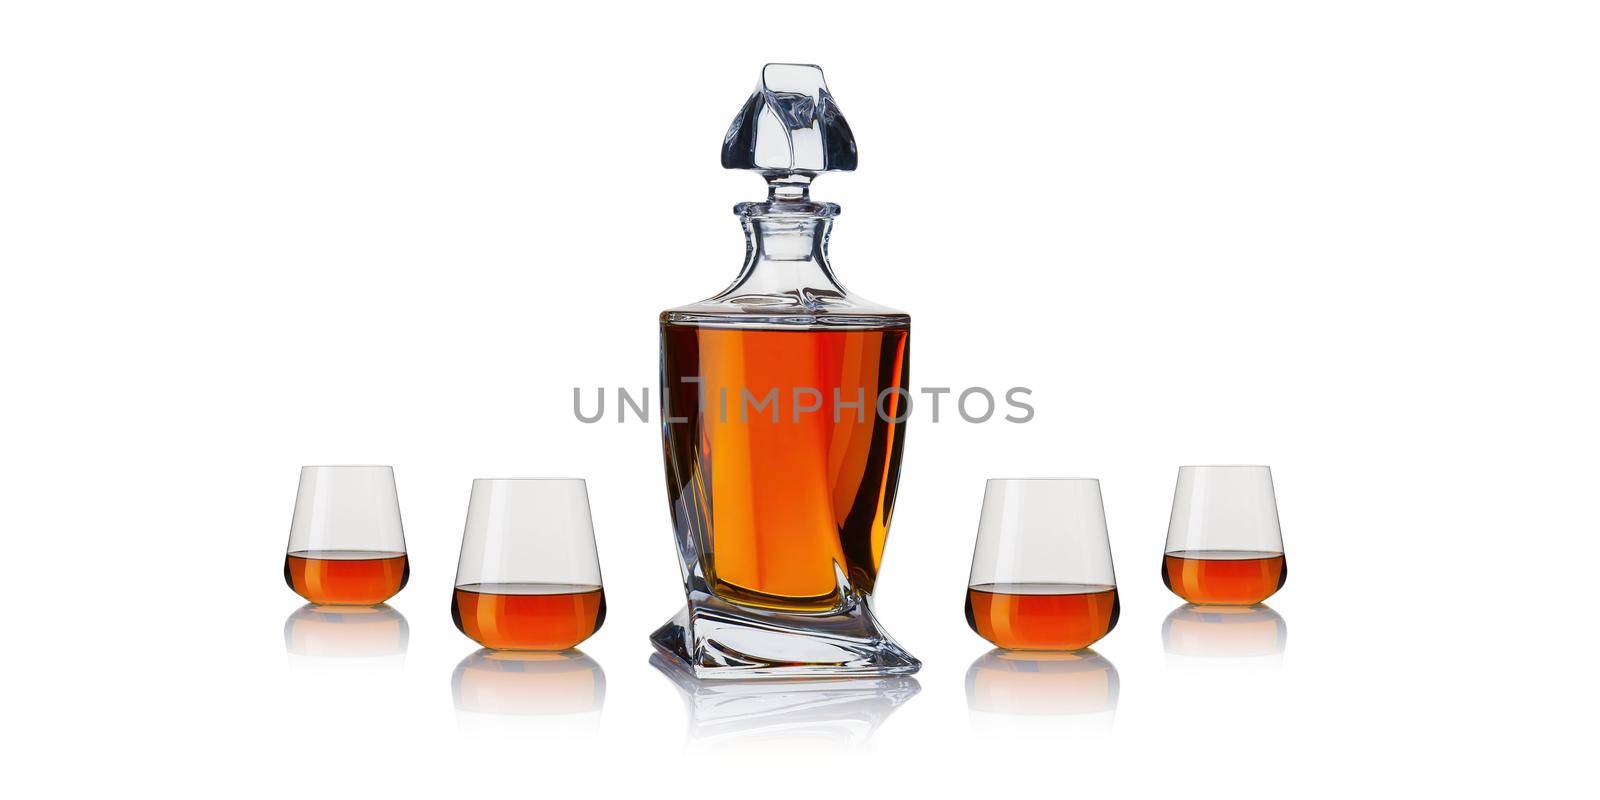 Decanter with cognac. Whiskey decanter on white background. Strong alcoholic drink in a decanter